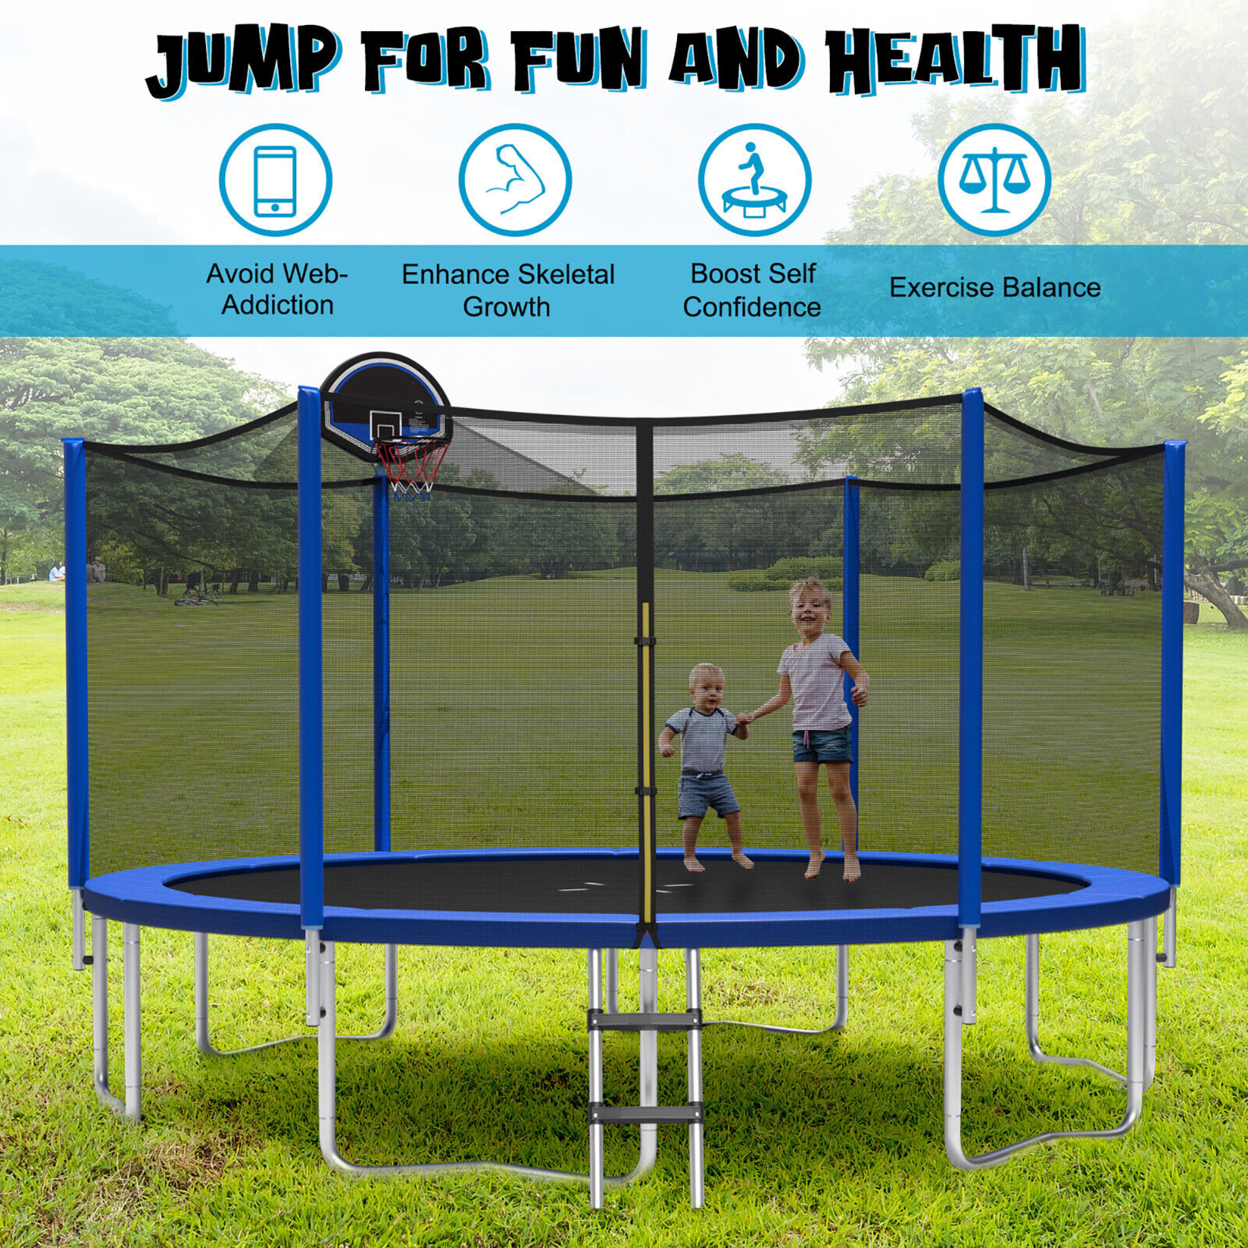 Gymax 16FT Outdoor Large Trampoline Safety Enclosure Net w/ Basketball Hoop Ladder